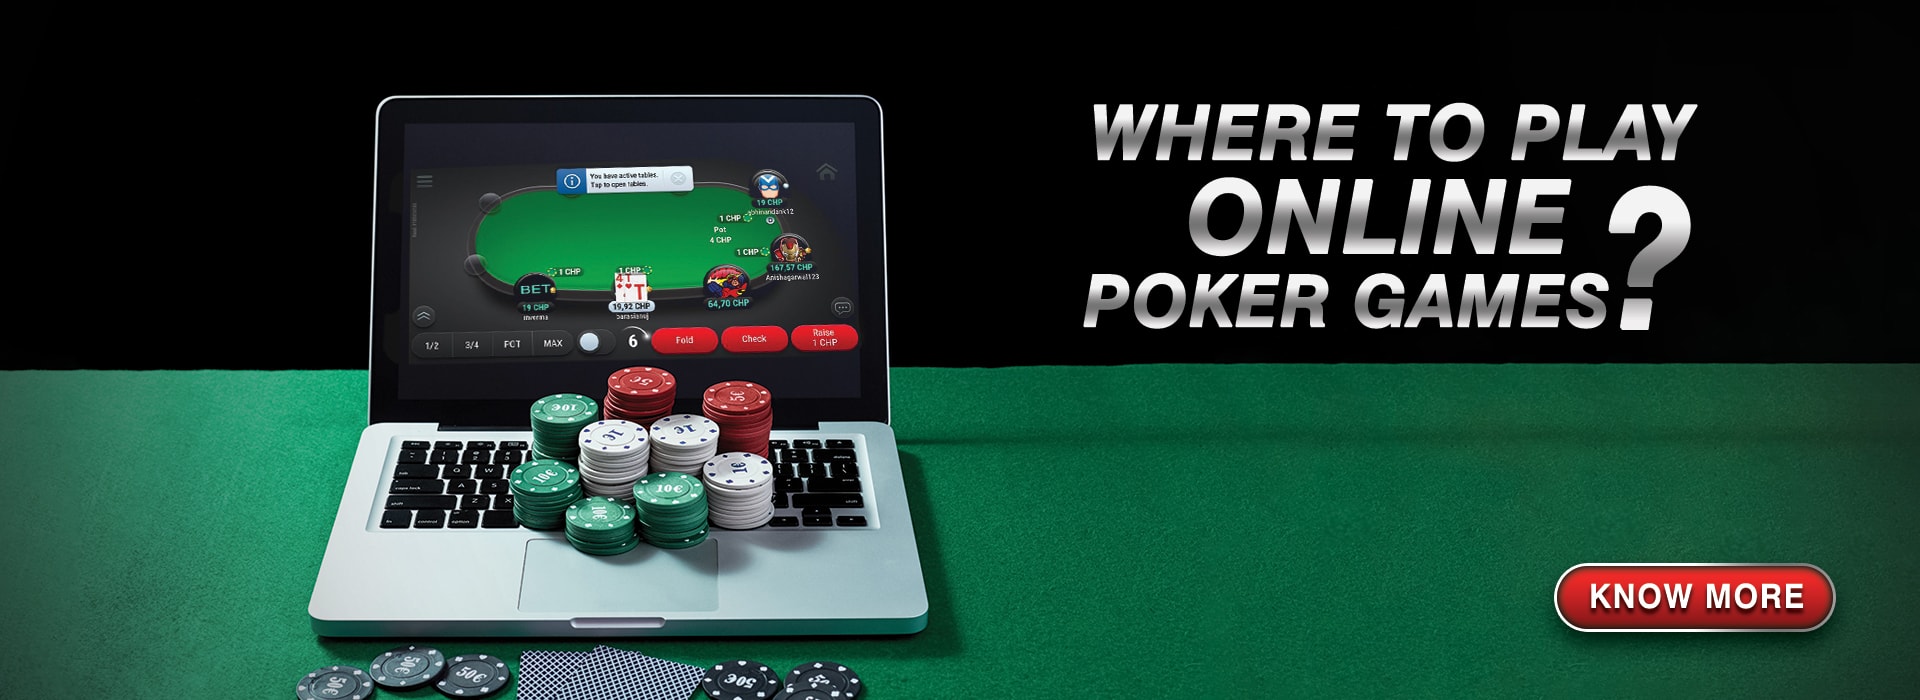 Where To Play Poker Online